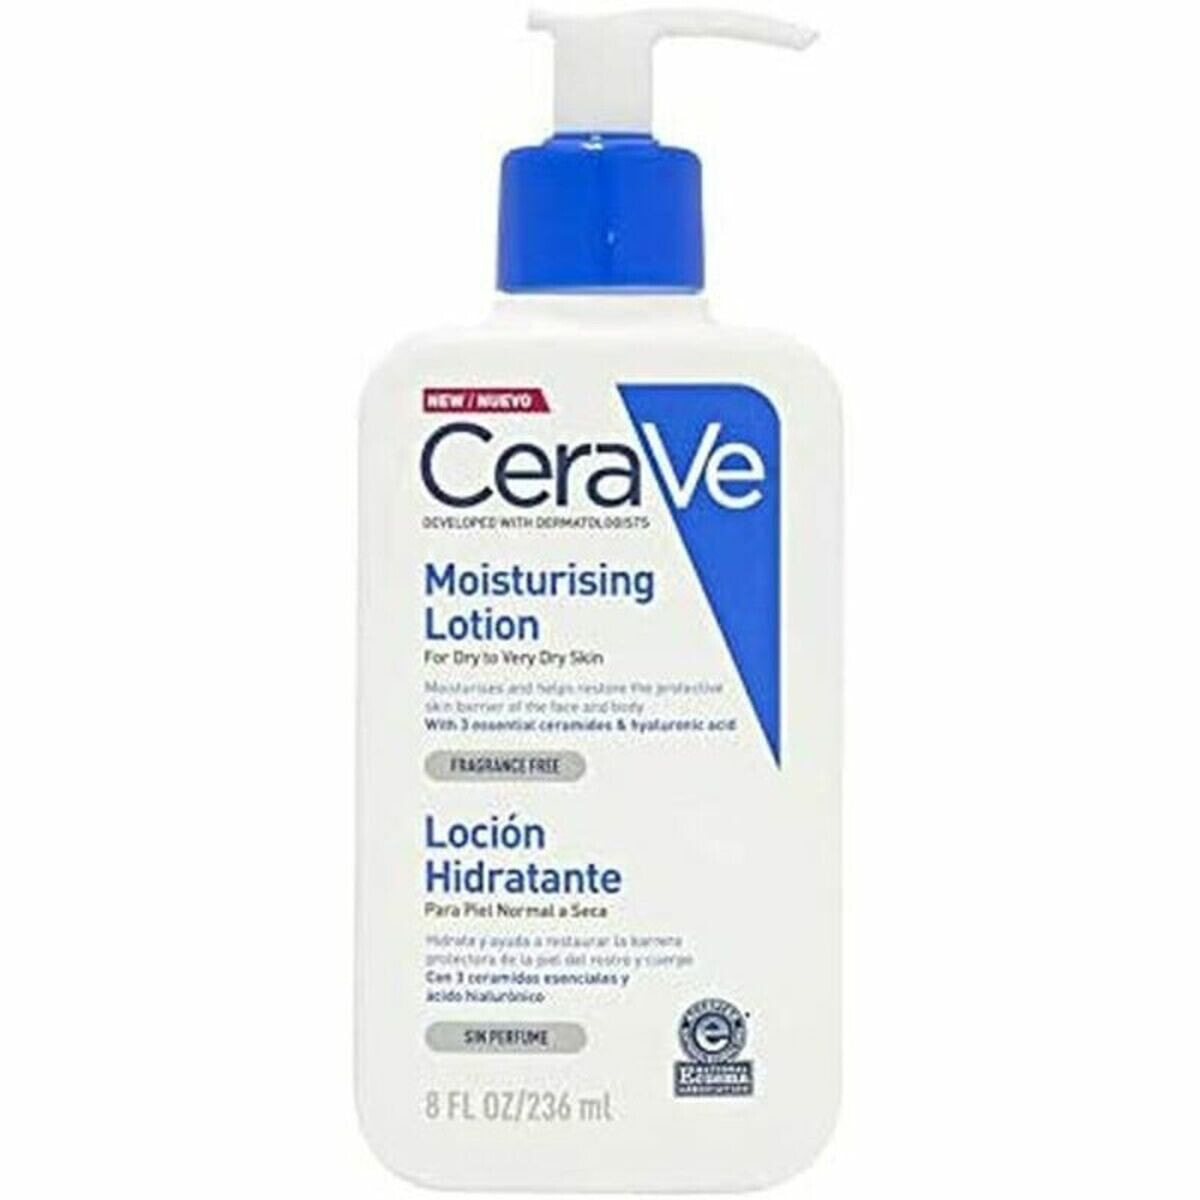 MOISTURISING LOTION for dry to very dry skin 236 ml